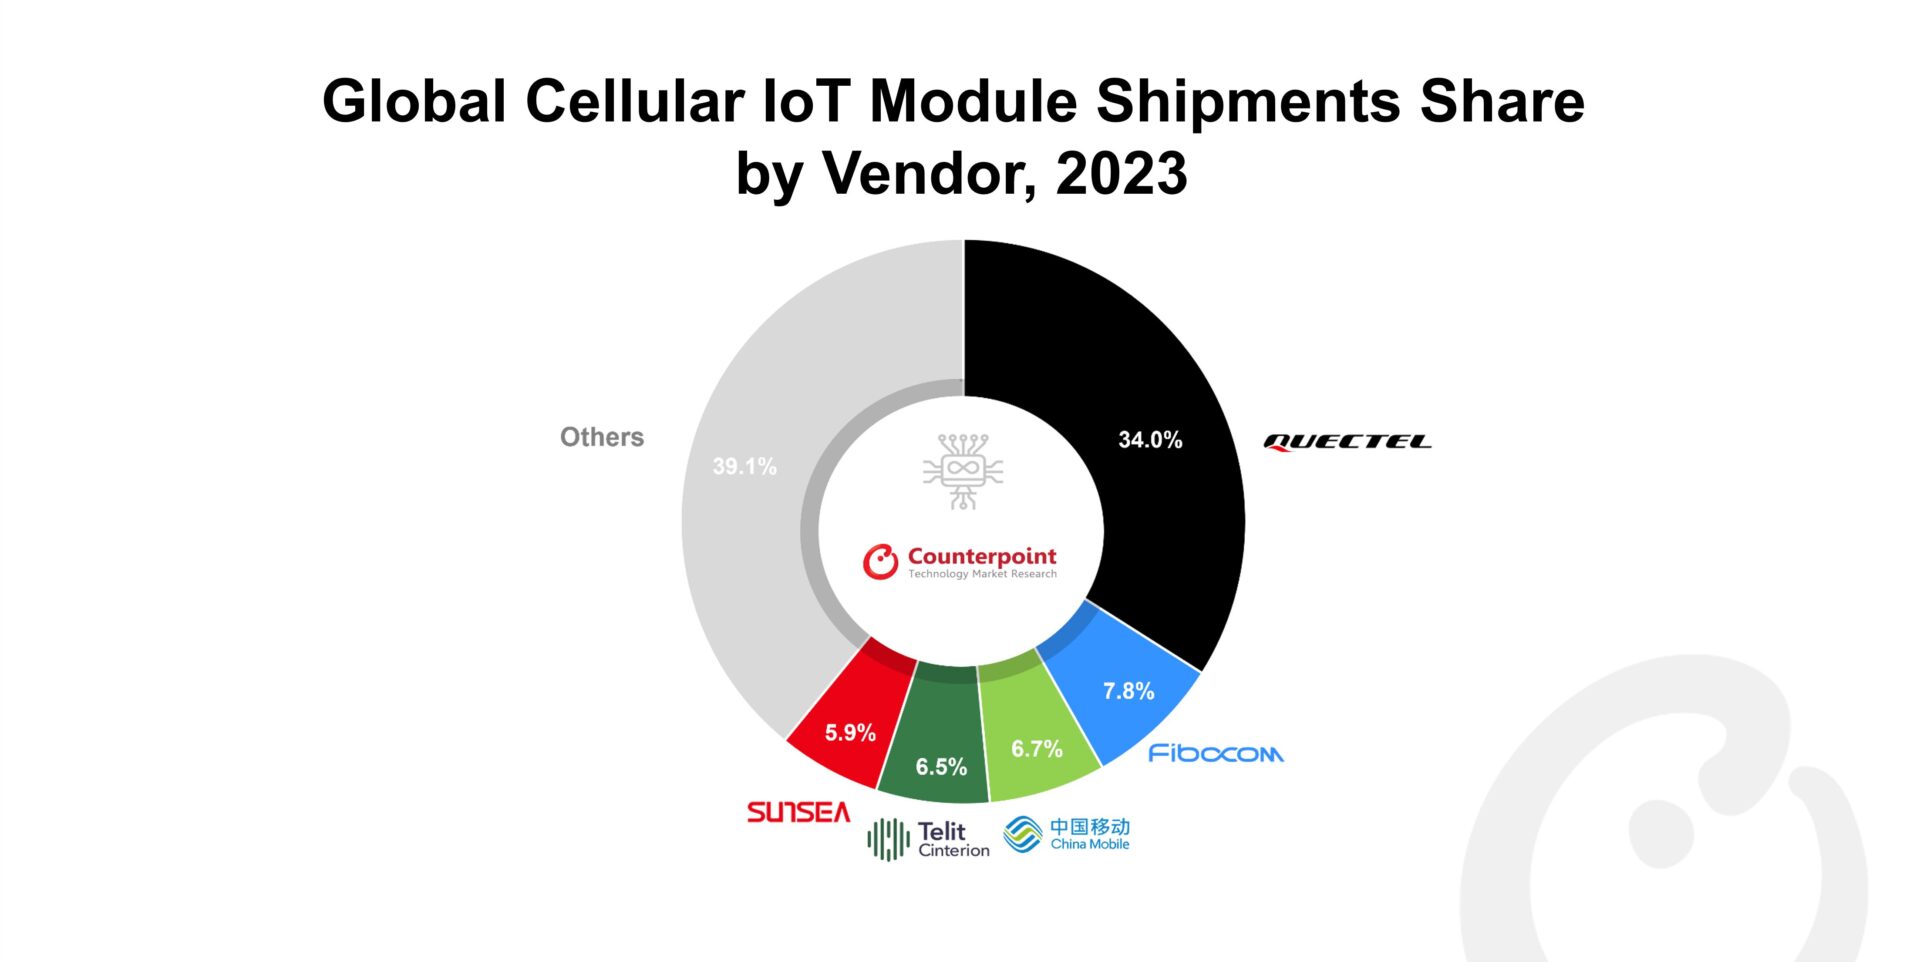 Global Cellular IoT Module Shipments Share by Vendor 2023